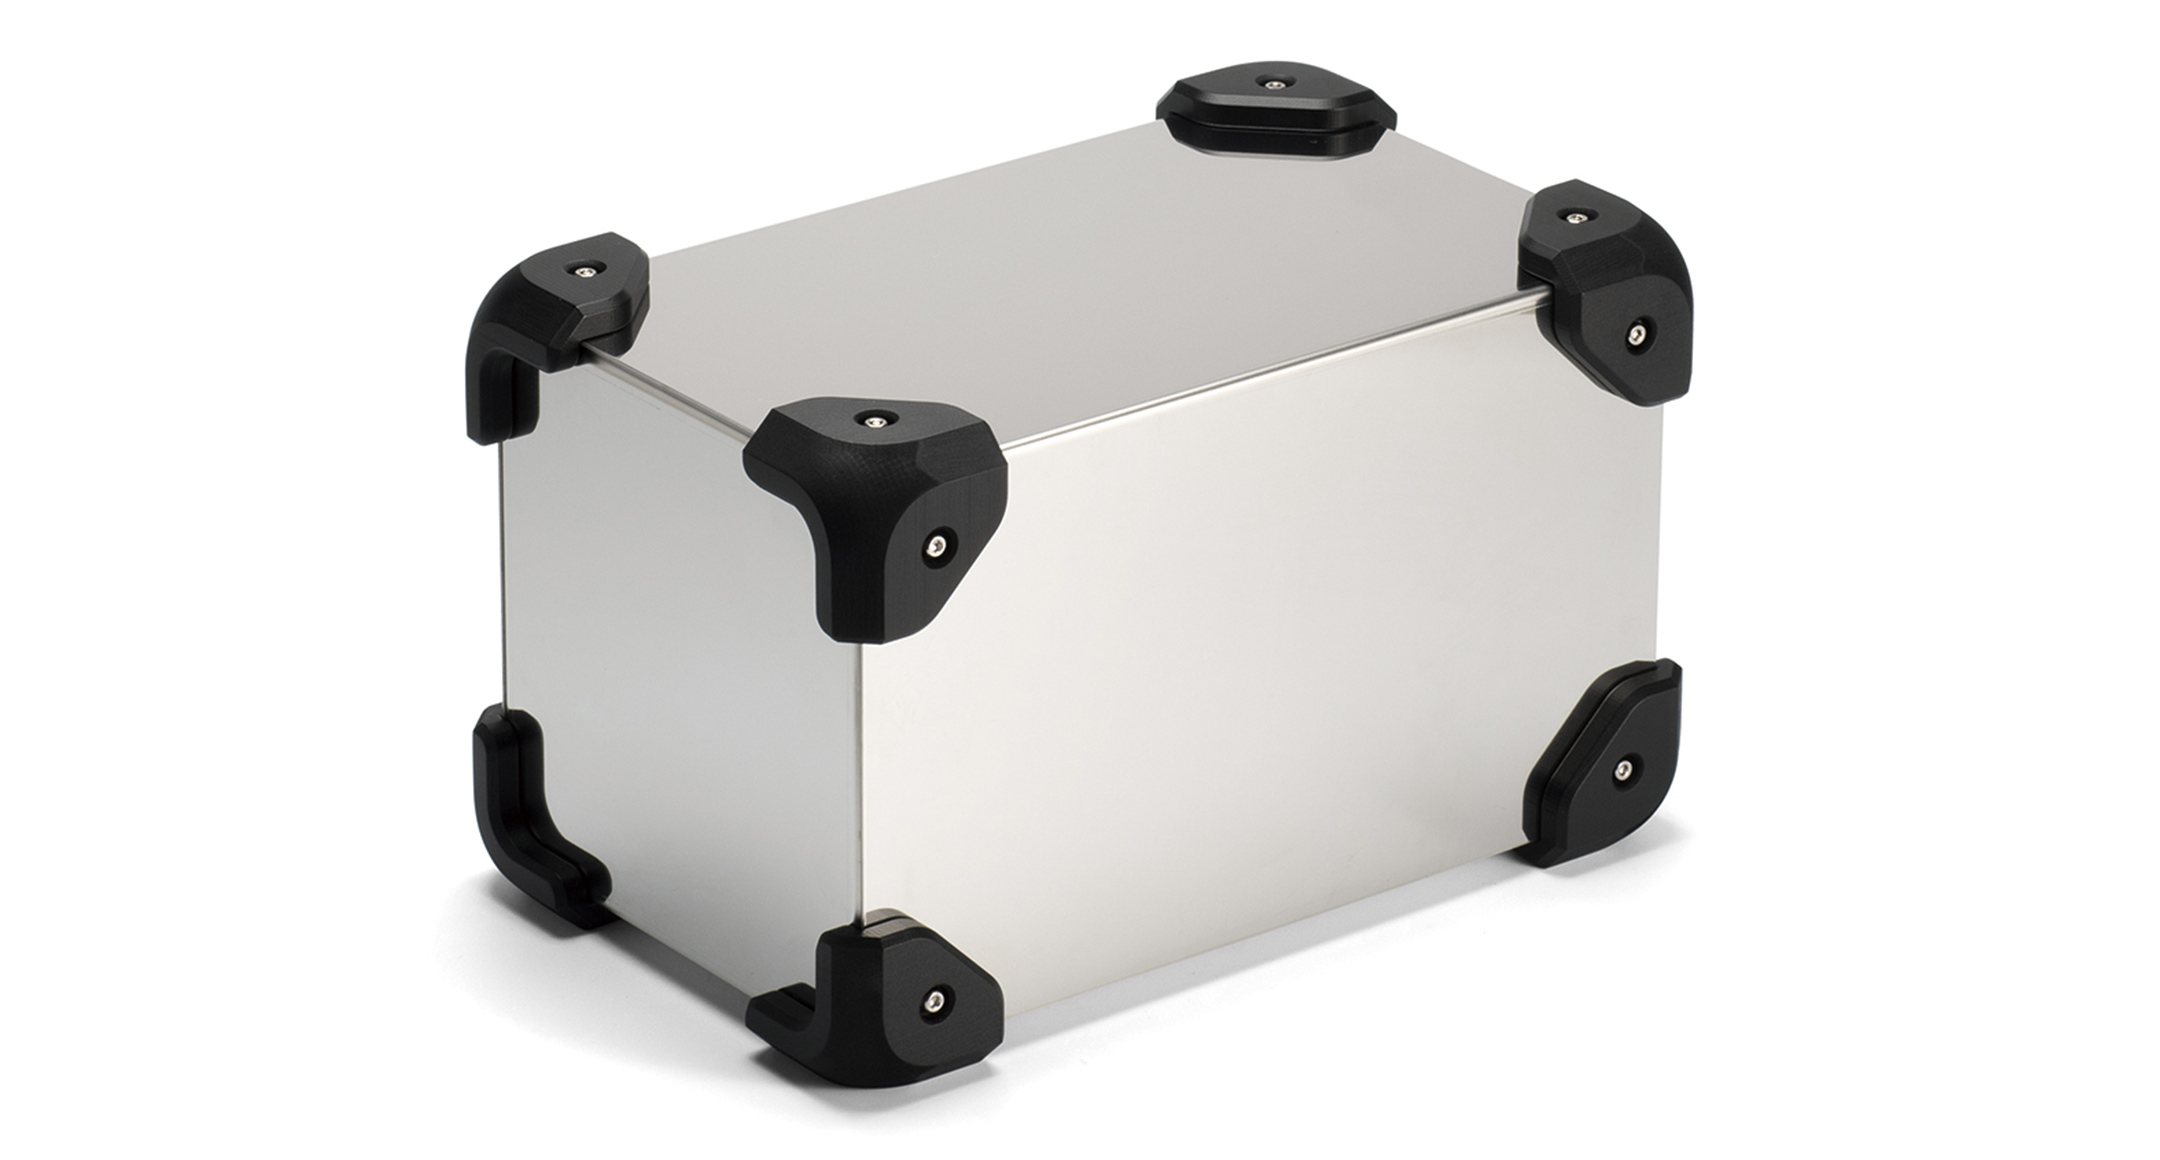 CUSTOM SIZED STAINLESS STEEL CASE with CORNER GUARD - MCGS series:Black Corners